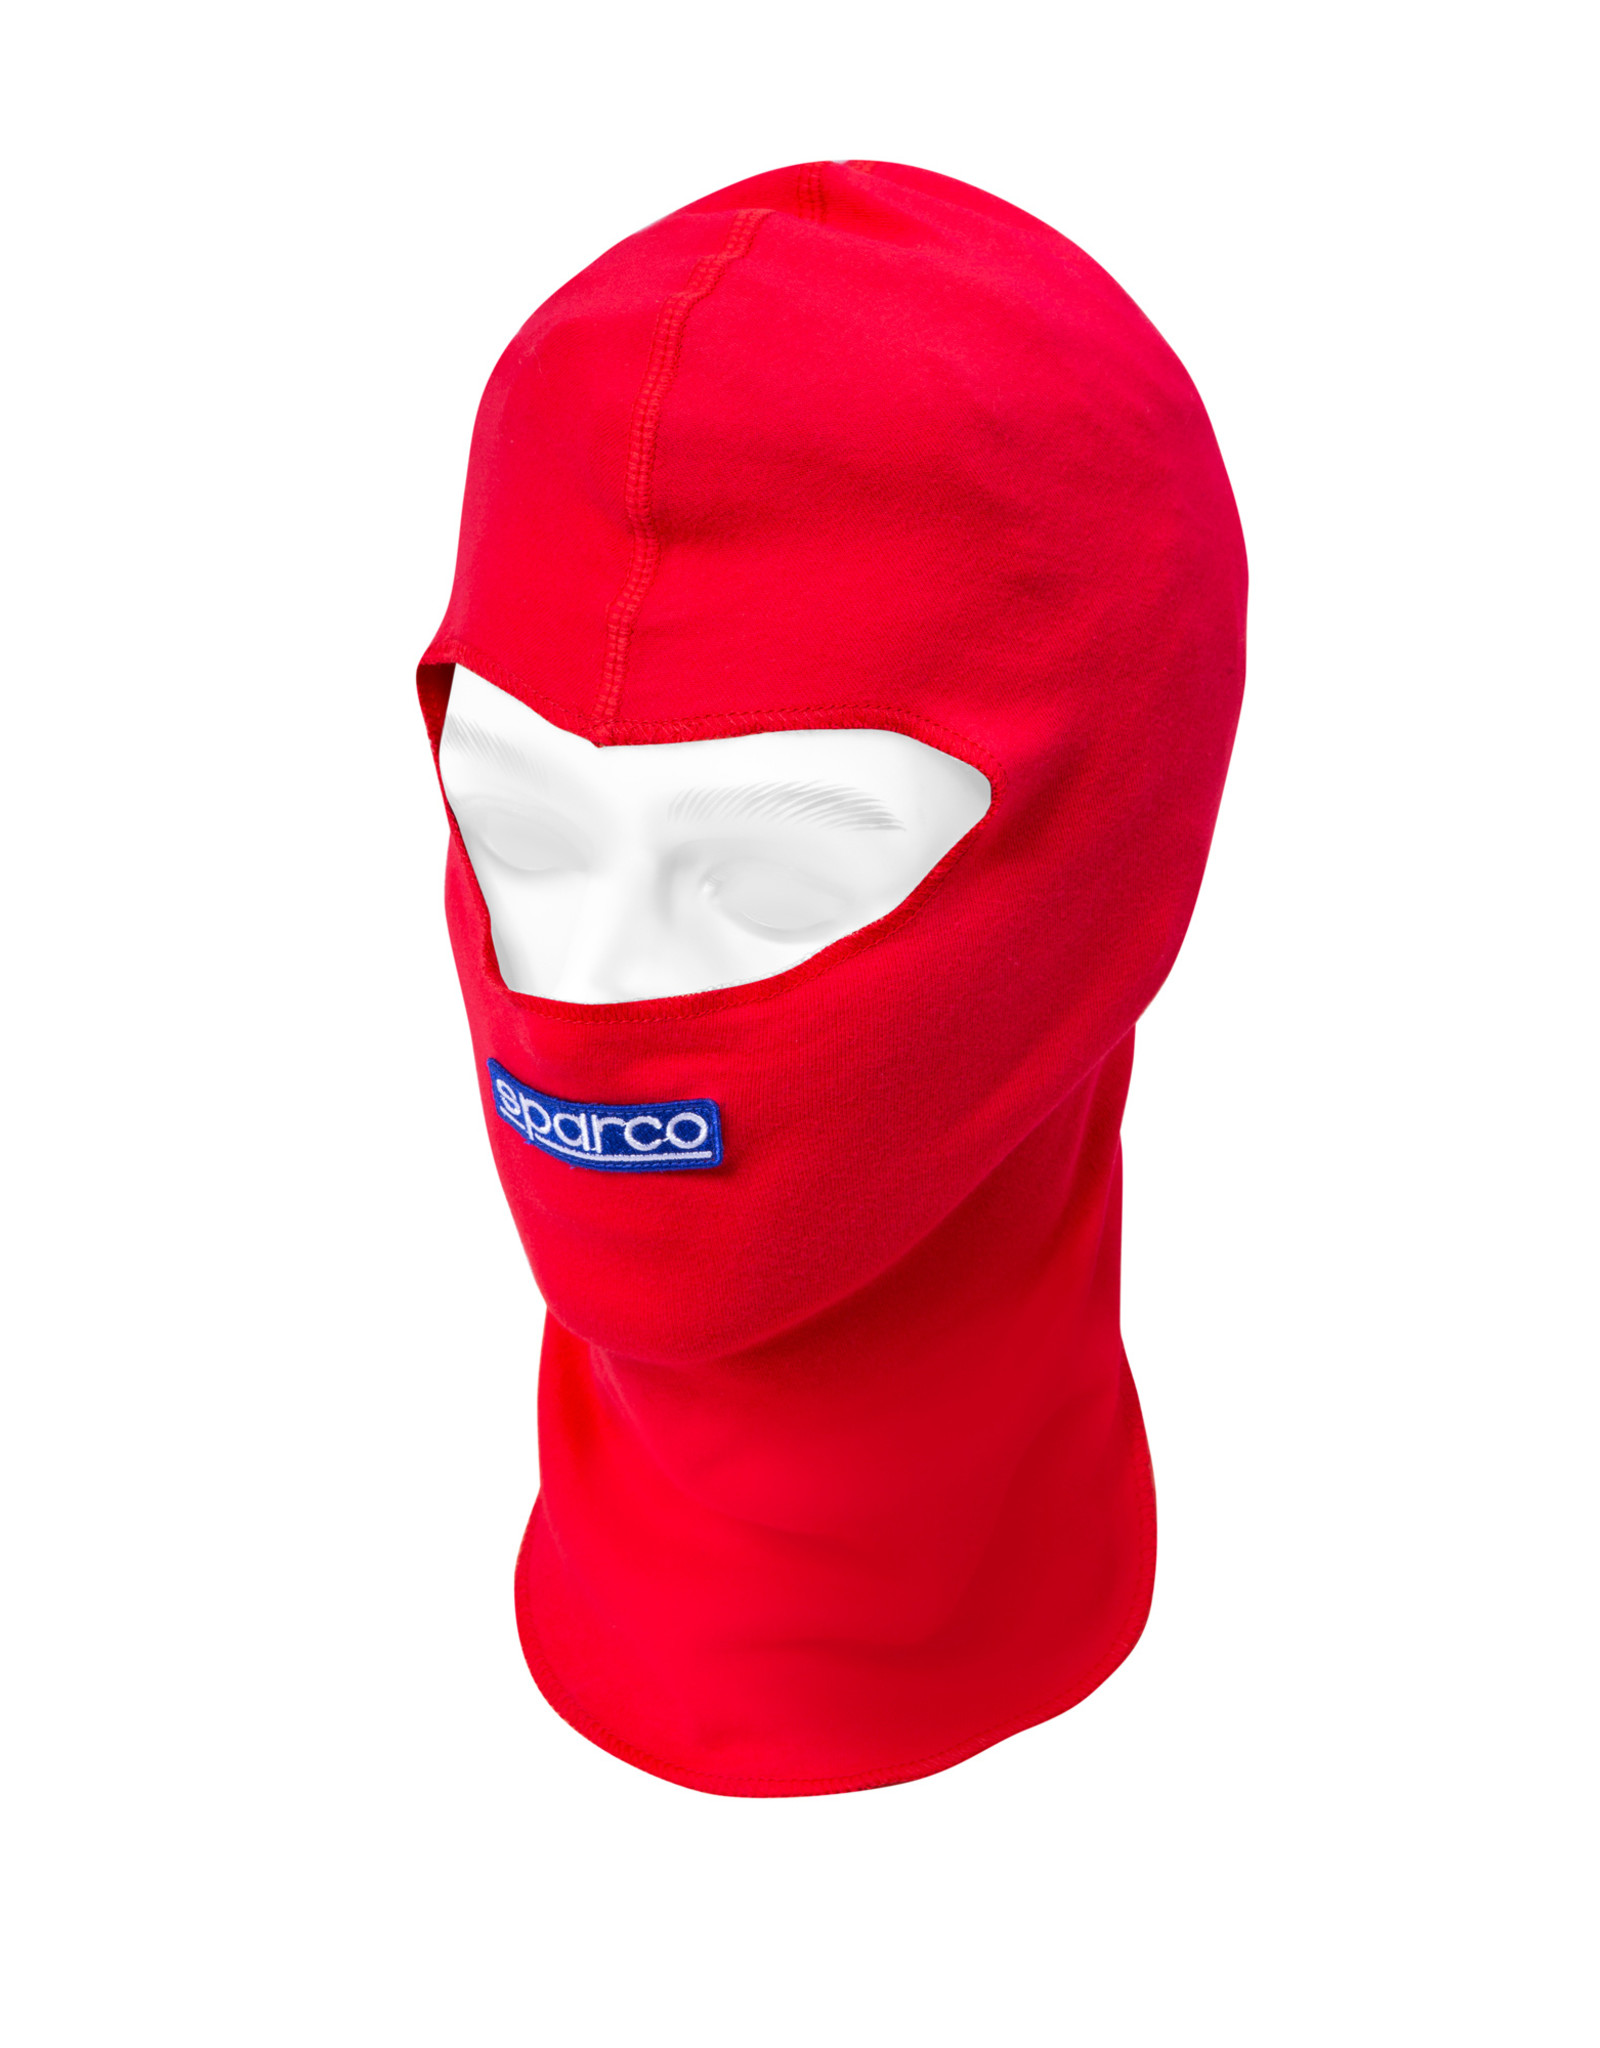 Sparco Sparco B-rookie Balaclava red